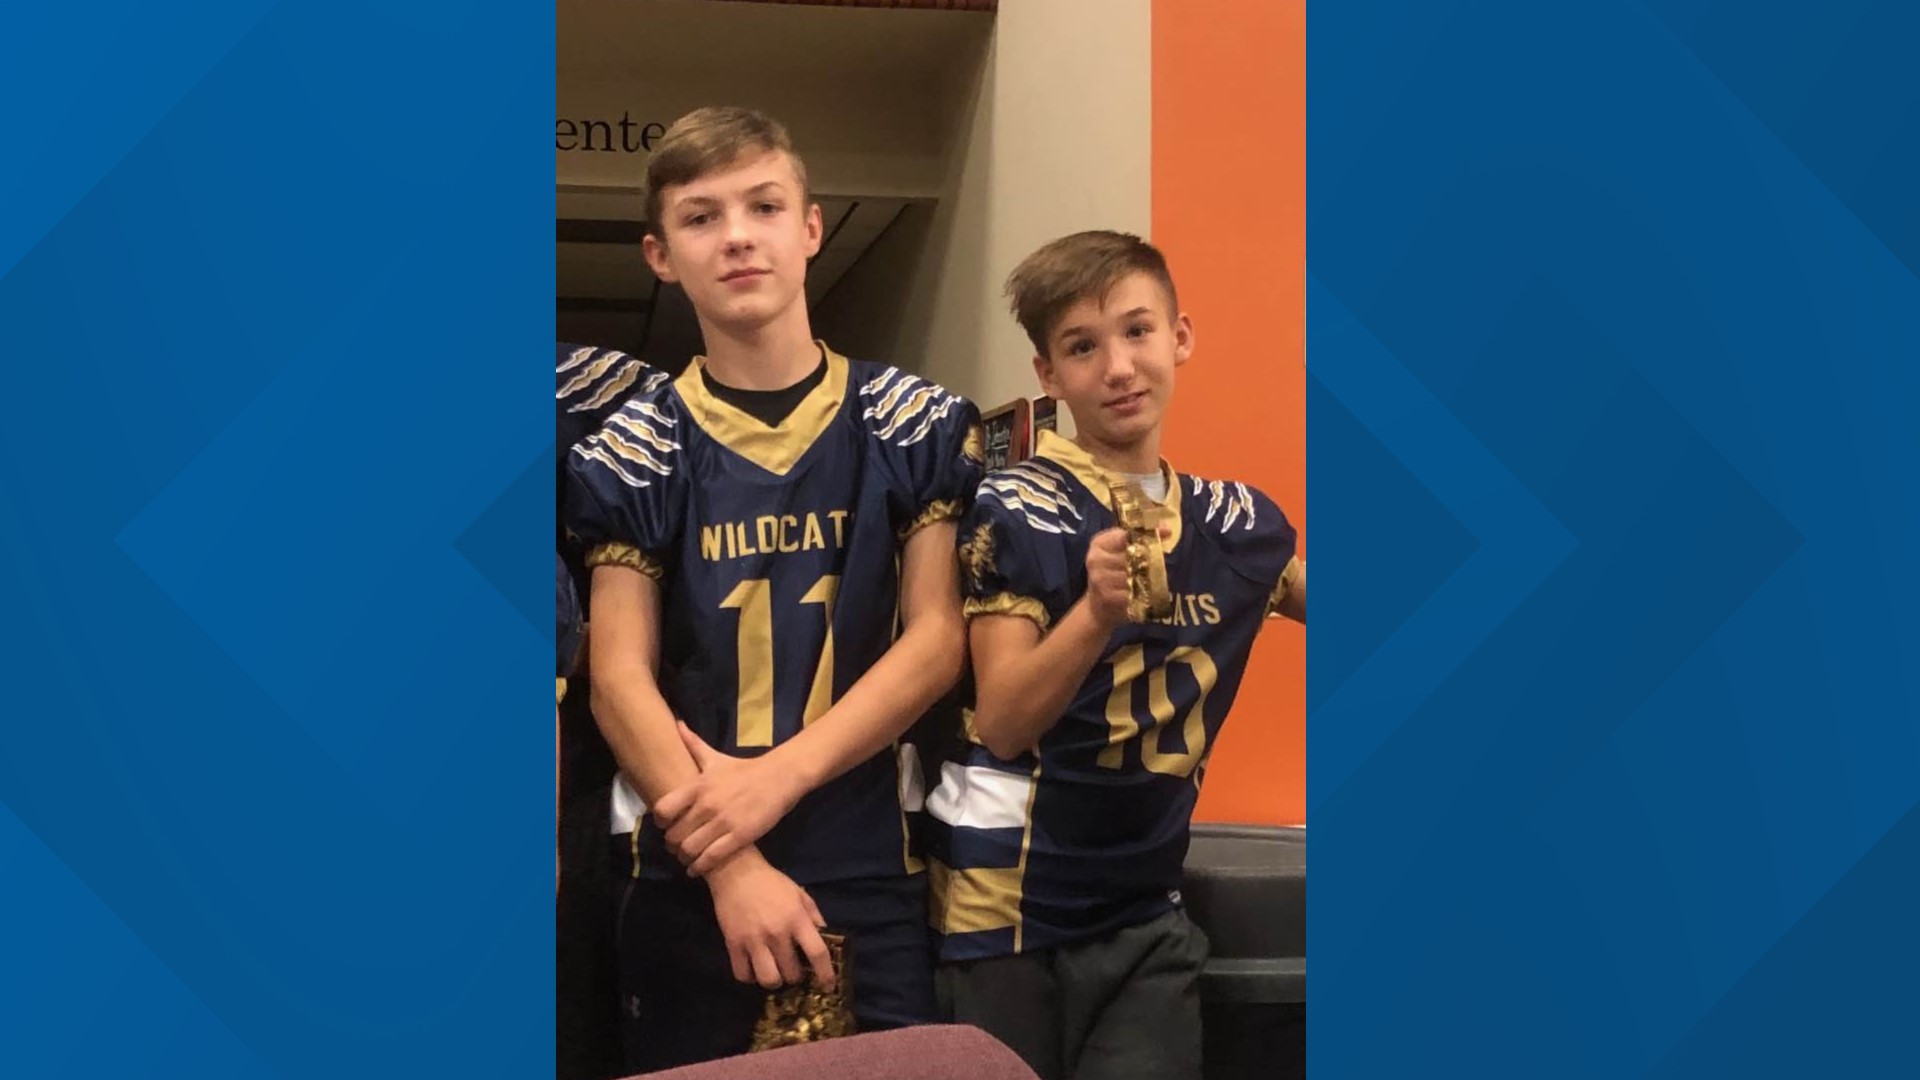 A house has been divided tonight as the high school football season begins this week, as two brothers who go to different schools played each other.